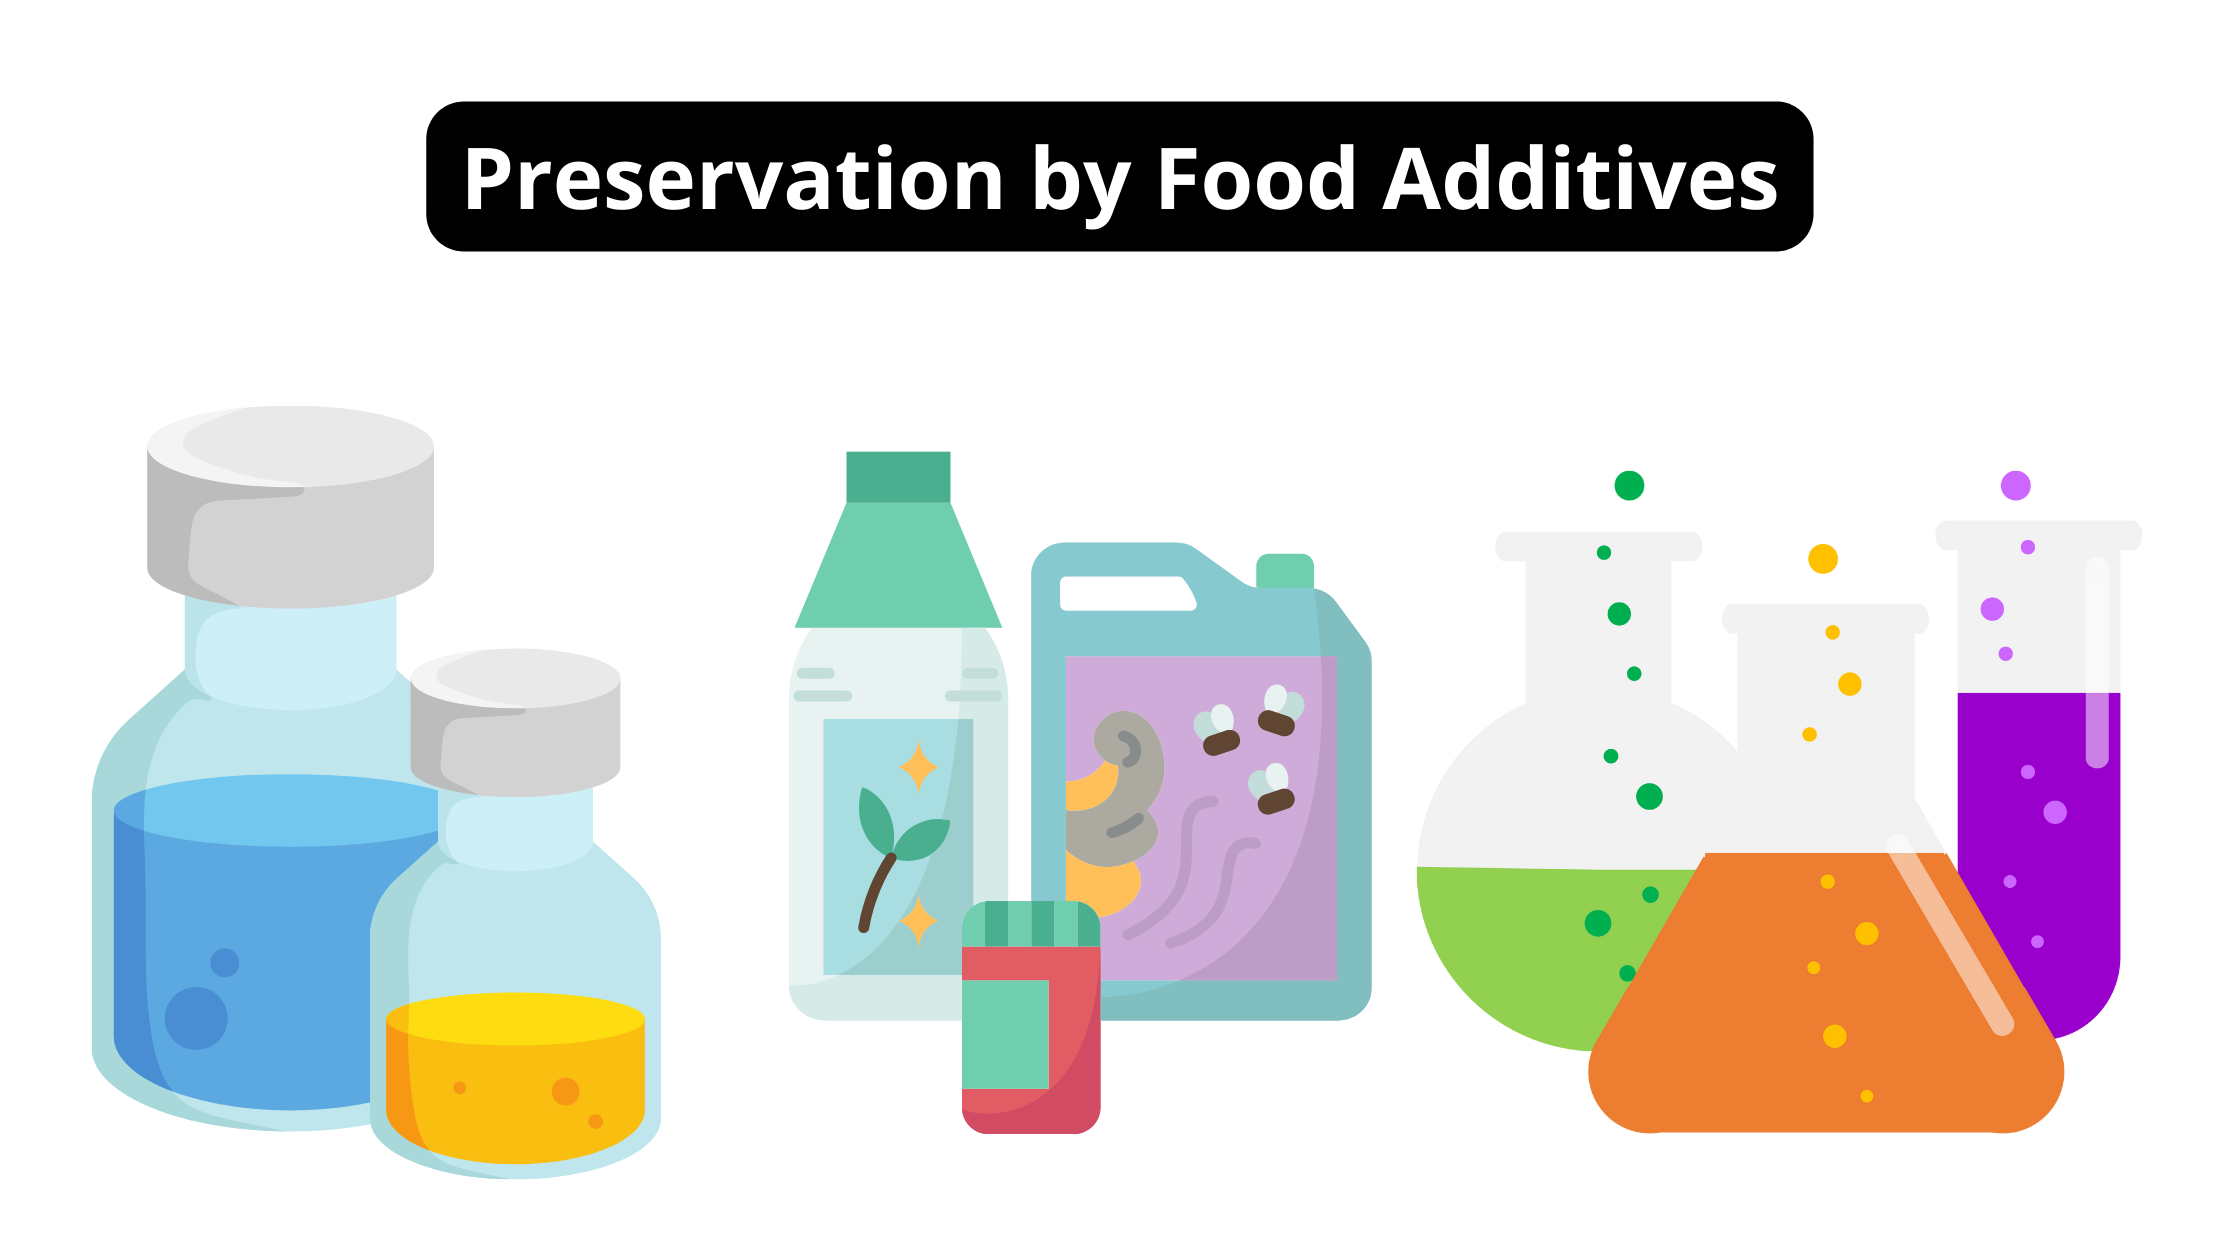 Preservation by Food Additives - Chemical Method